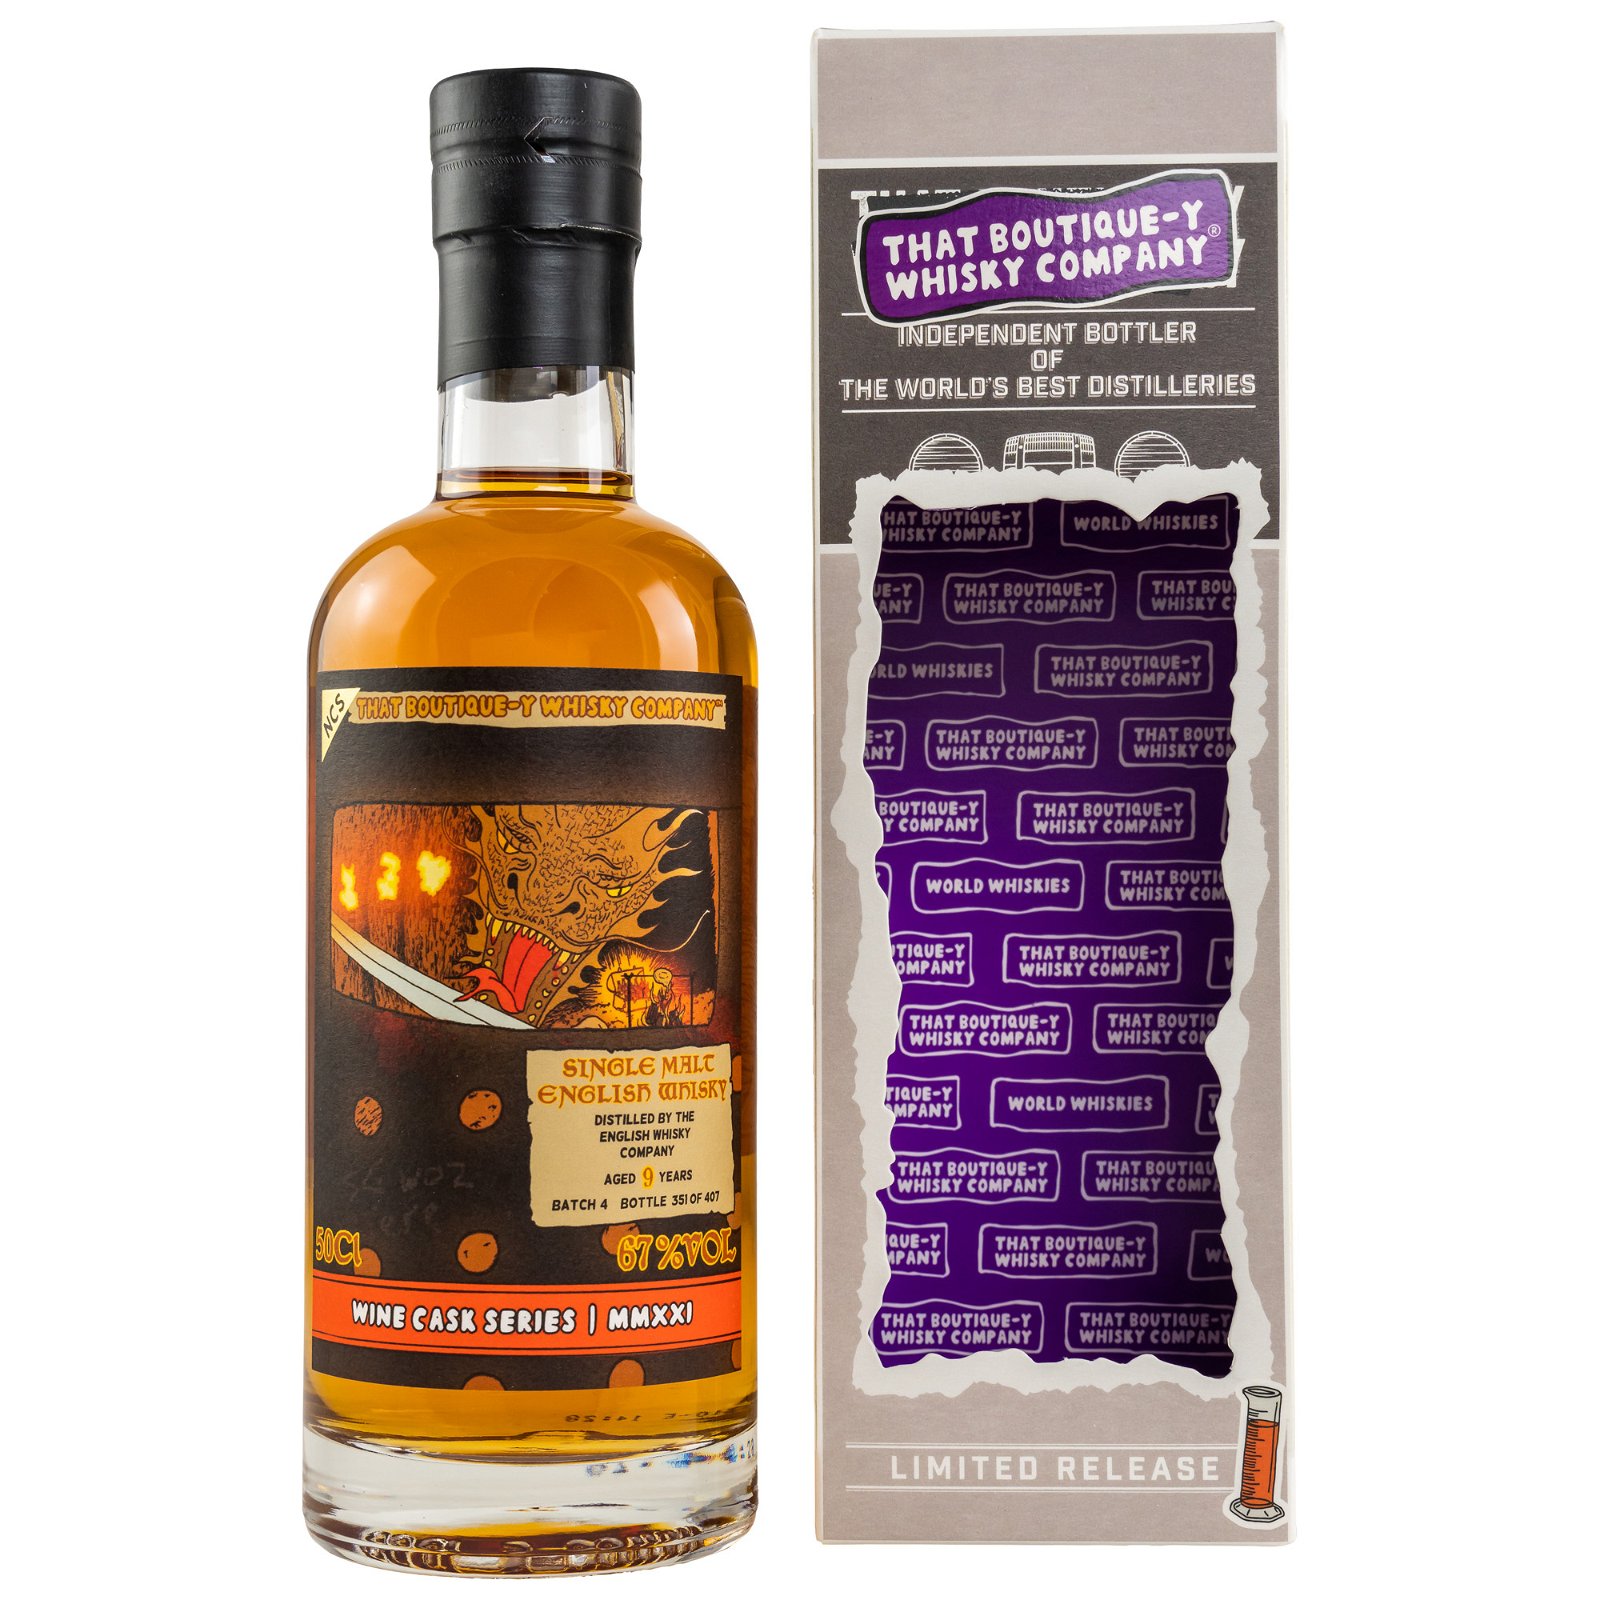 English Whisky Co. 9 Jahre Batch 4 Wine Cask Series (That Boutique-Y Whisky Company)